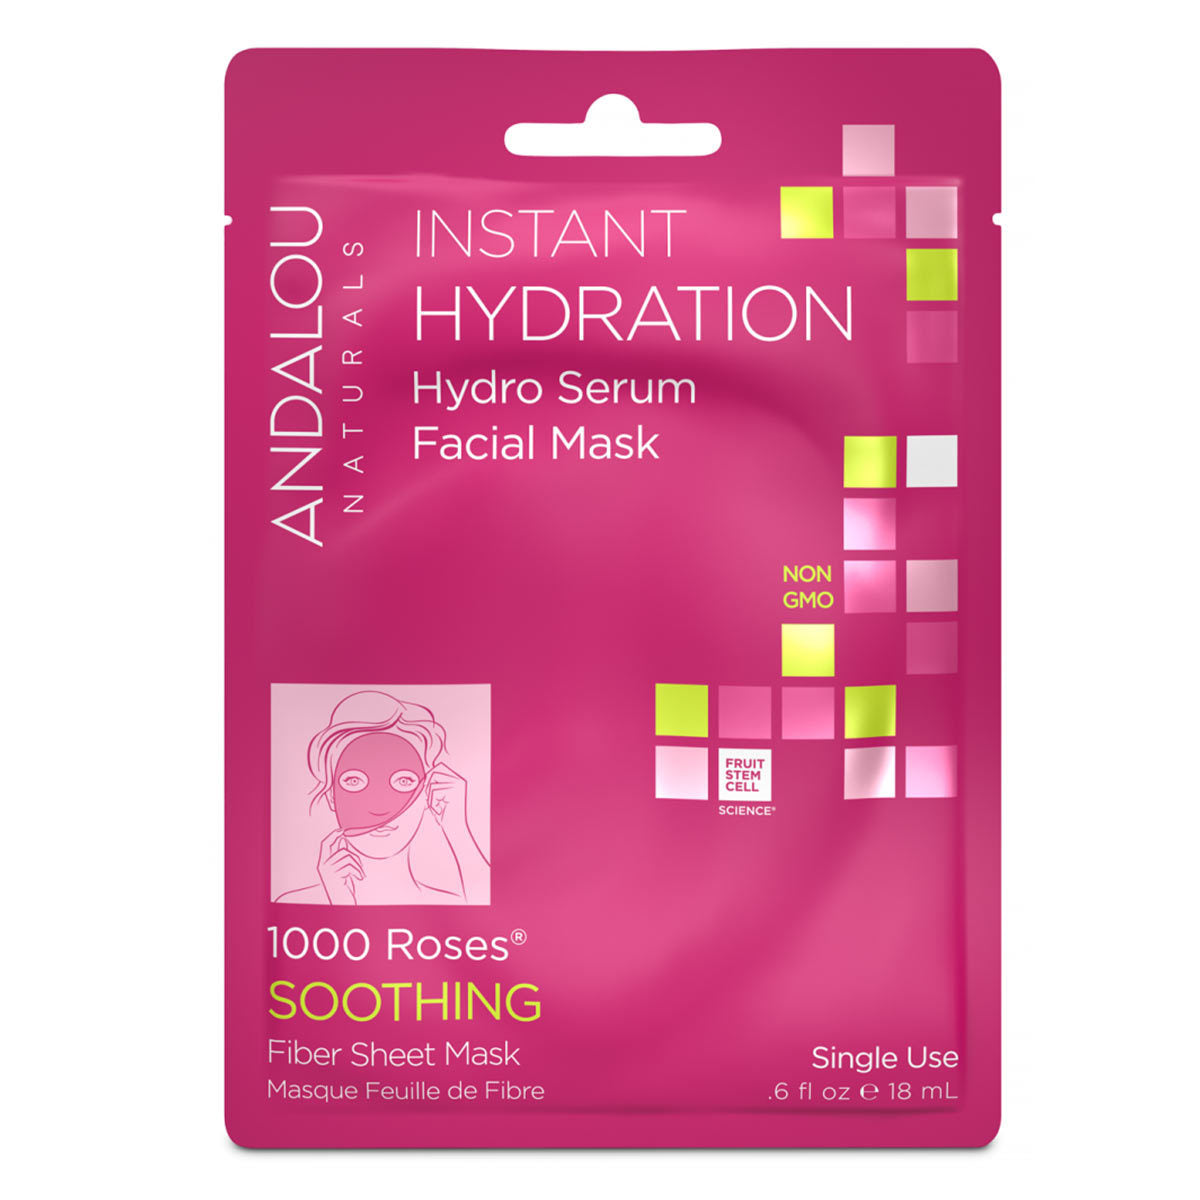 Primary image of Hydration Facial Mask